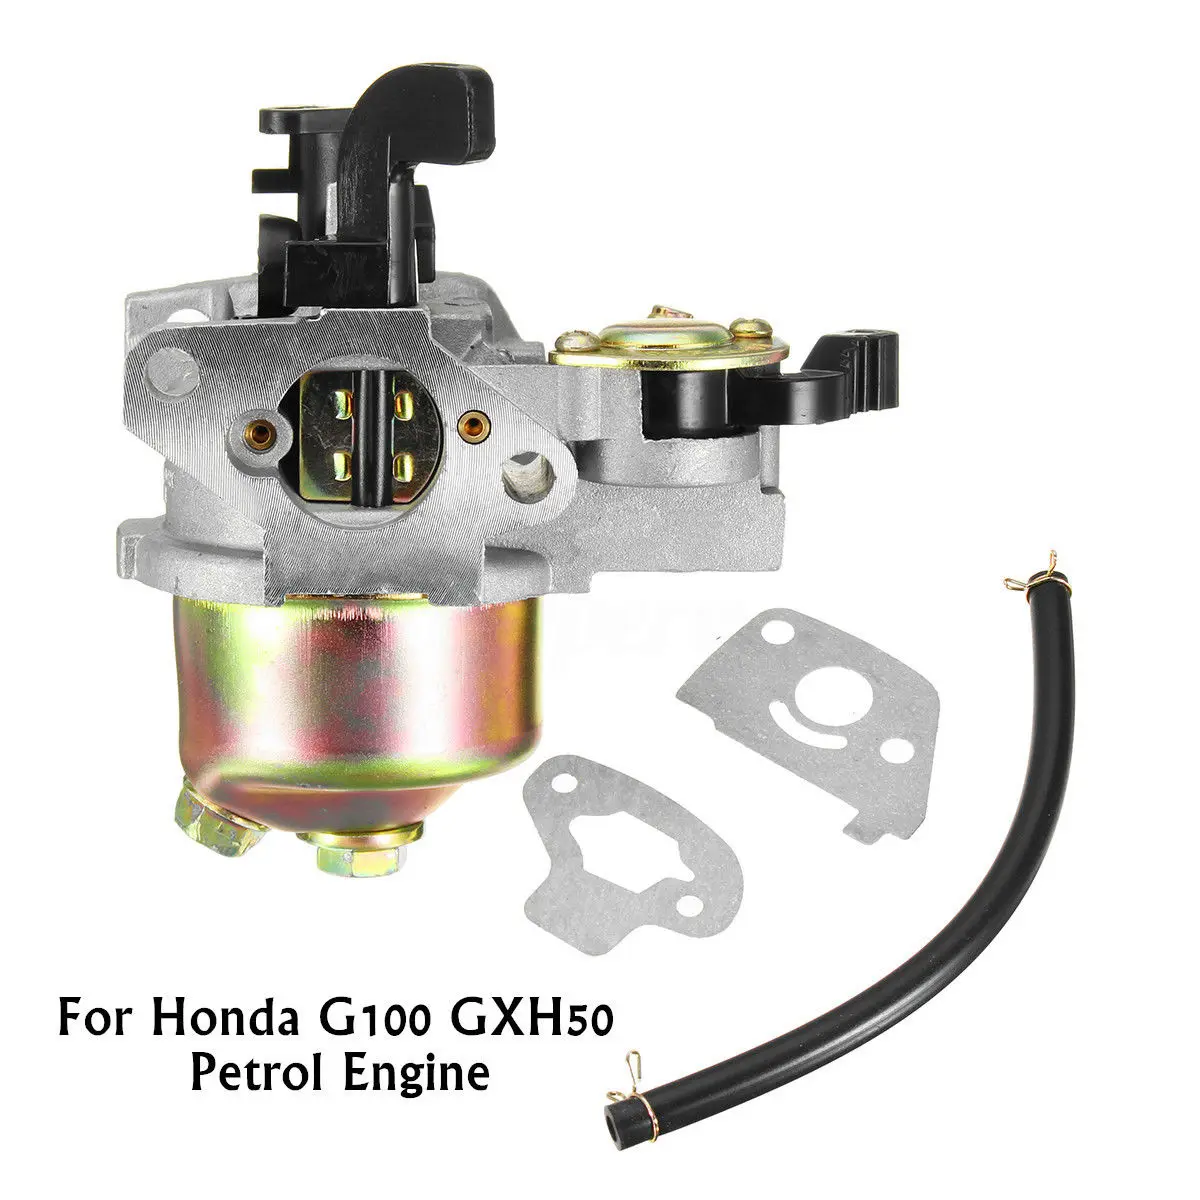 

New Carburetor For Honda G100 GXH50 4 Stroke Petrol Engines Carburetor Oil Pipe Gaskets Comes With Oil Pipe And Gaskets